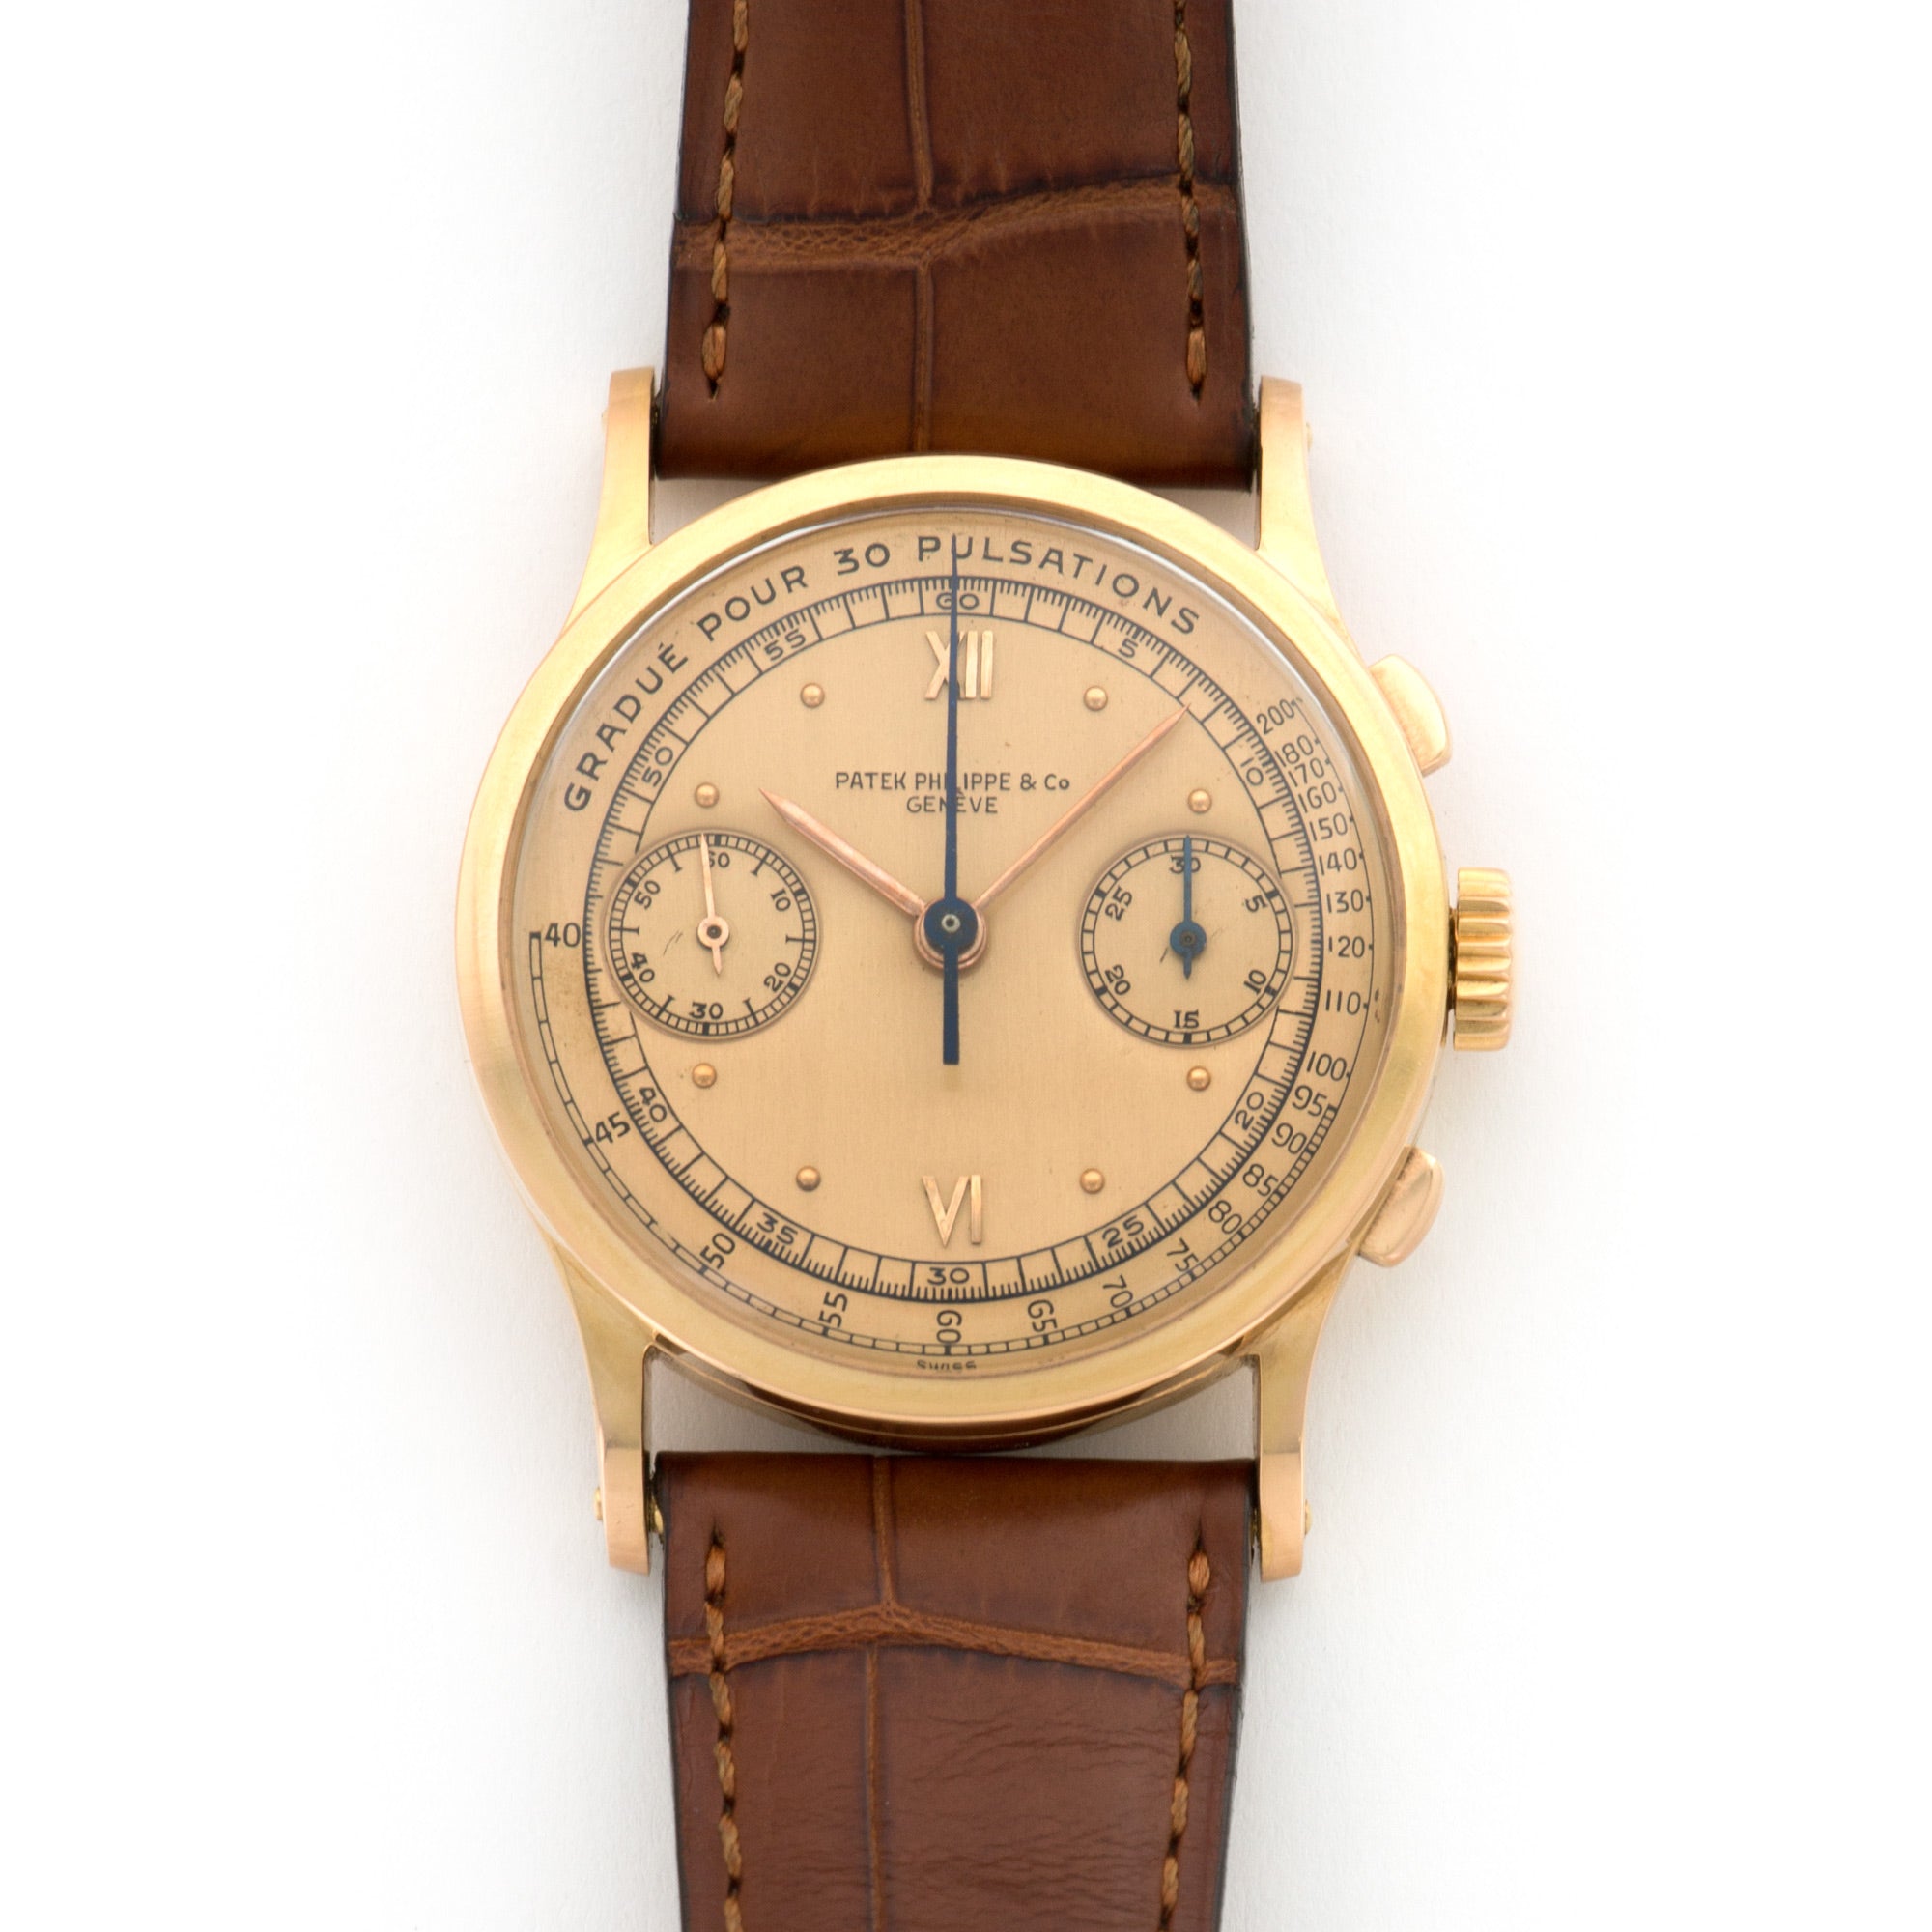 Patek Philippe - Patek Philippe Rose Gold Chronograph Pulsometer Scale Watch Ref. 533 - The Keystone Watches